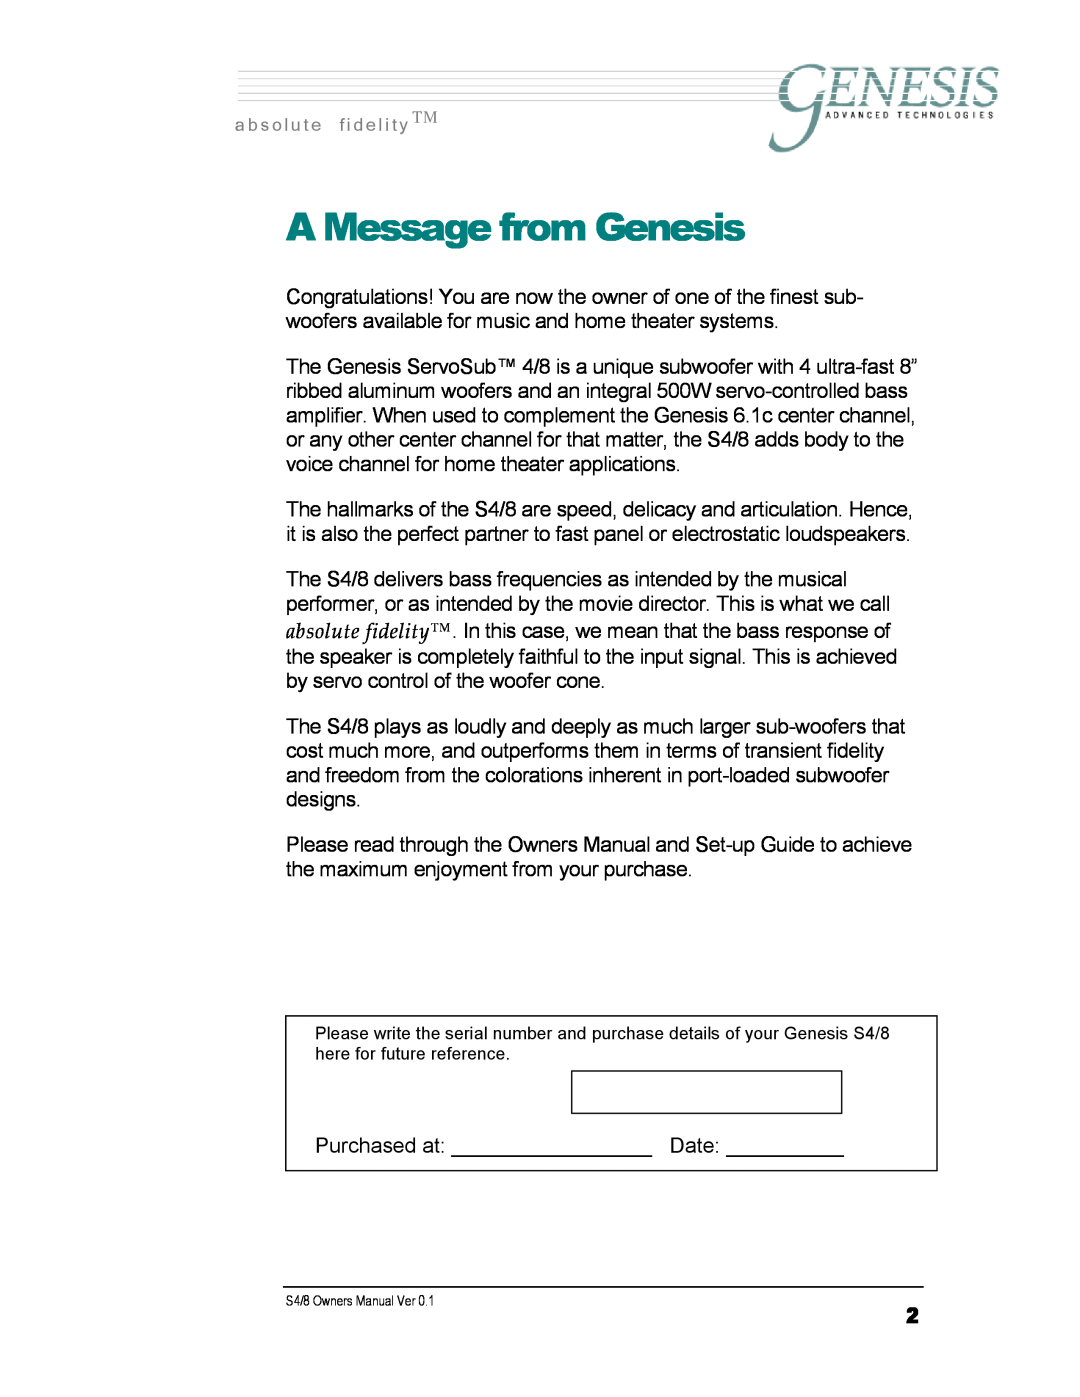 Genesis Advanced Technologies S4/8 owner manual A Message from Genesis, a b s o l u t e f i d e l i t y 